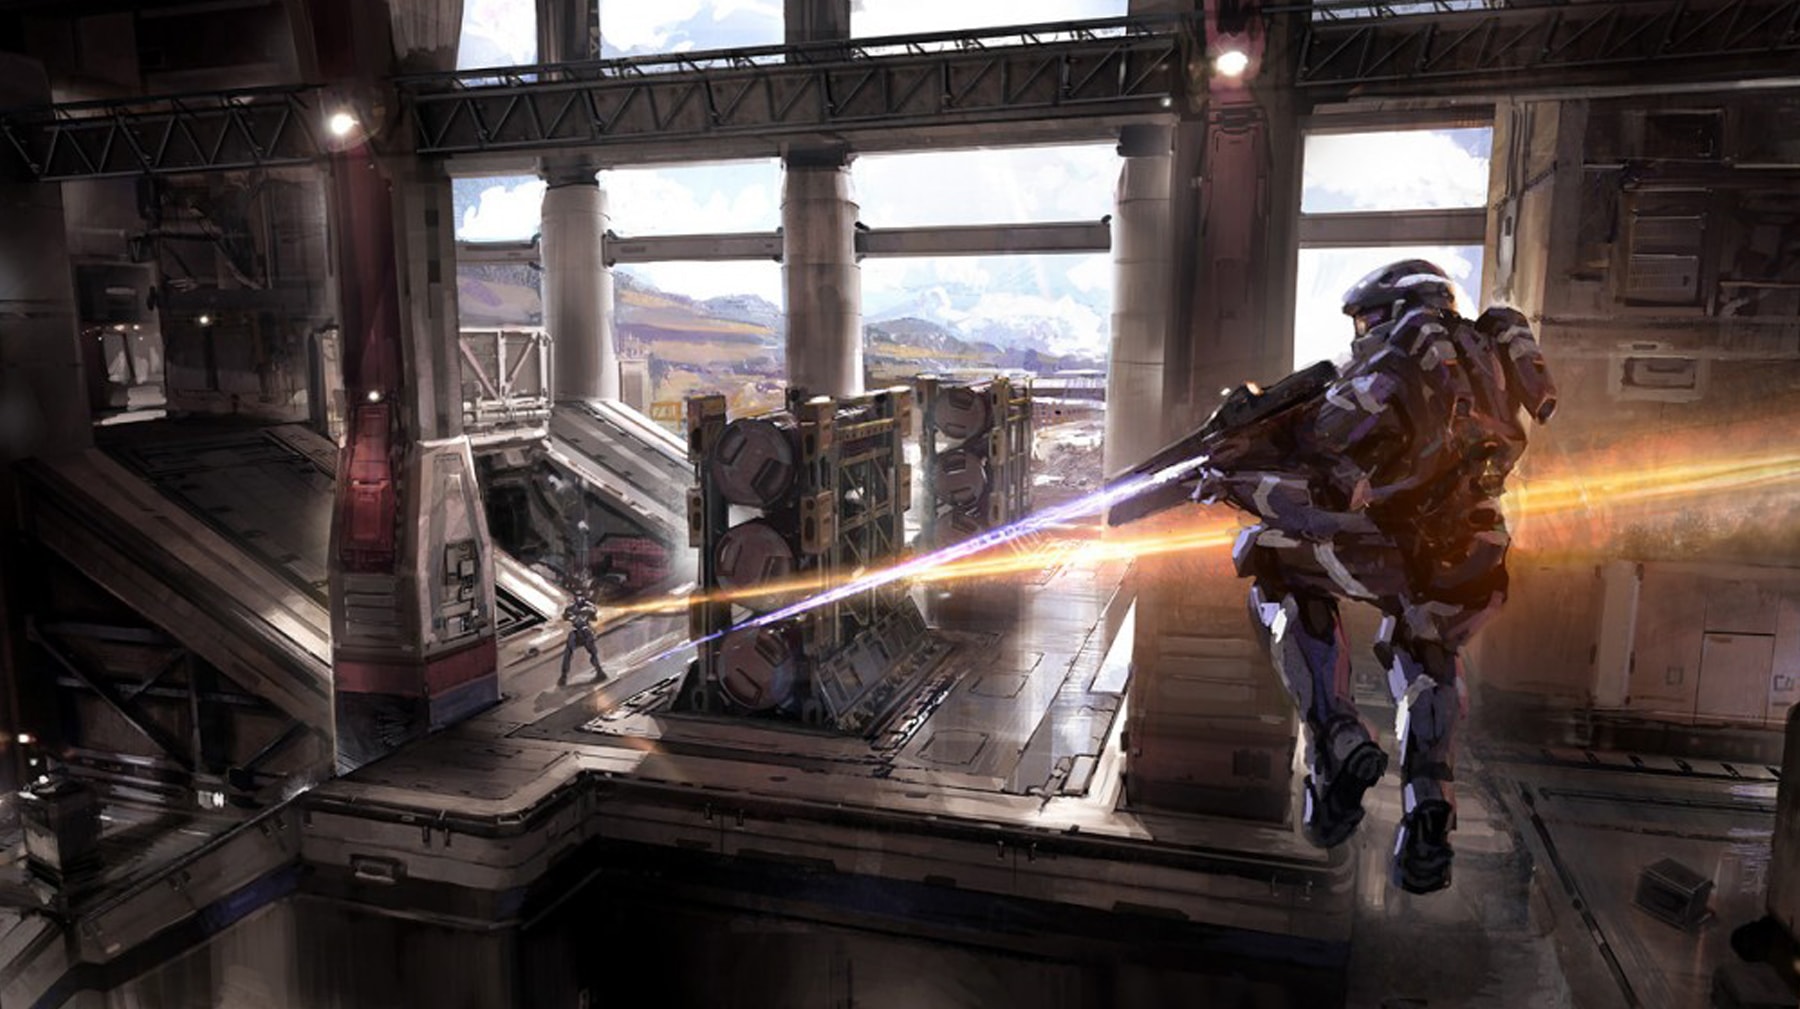 Screenshot of Halo 4 characters fighting in a military facility